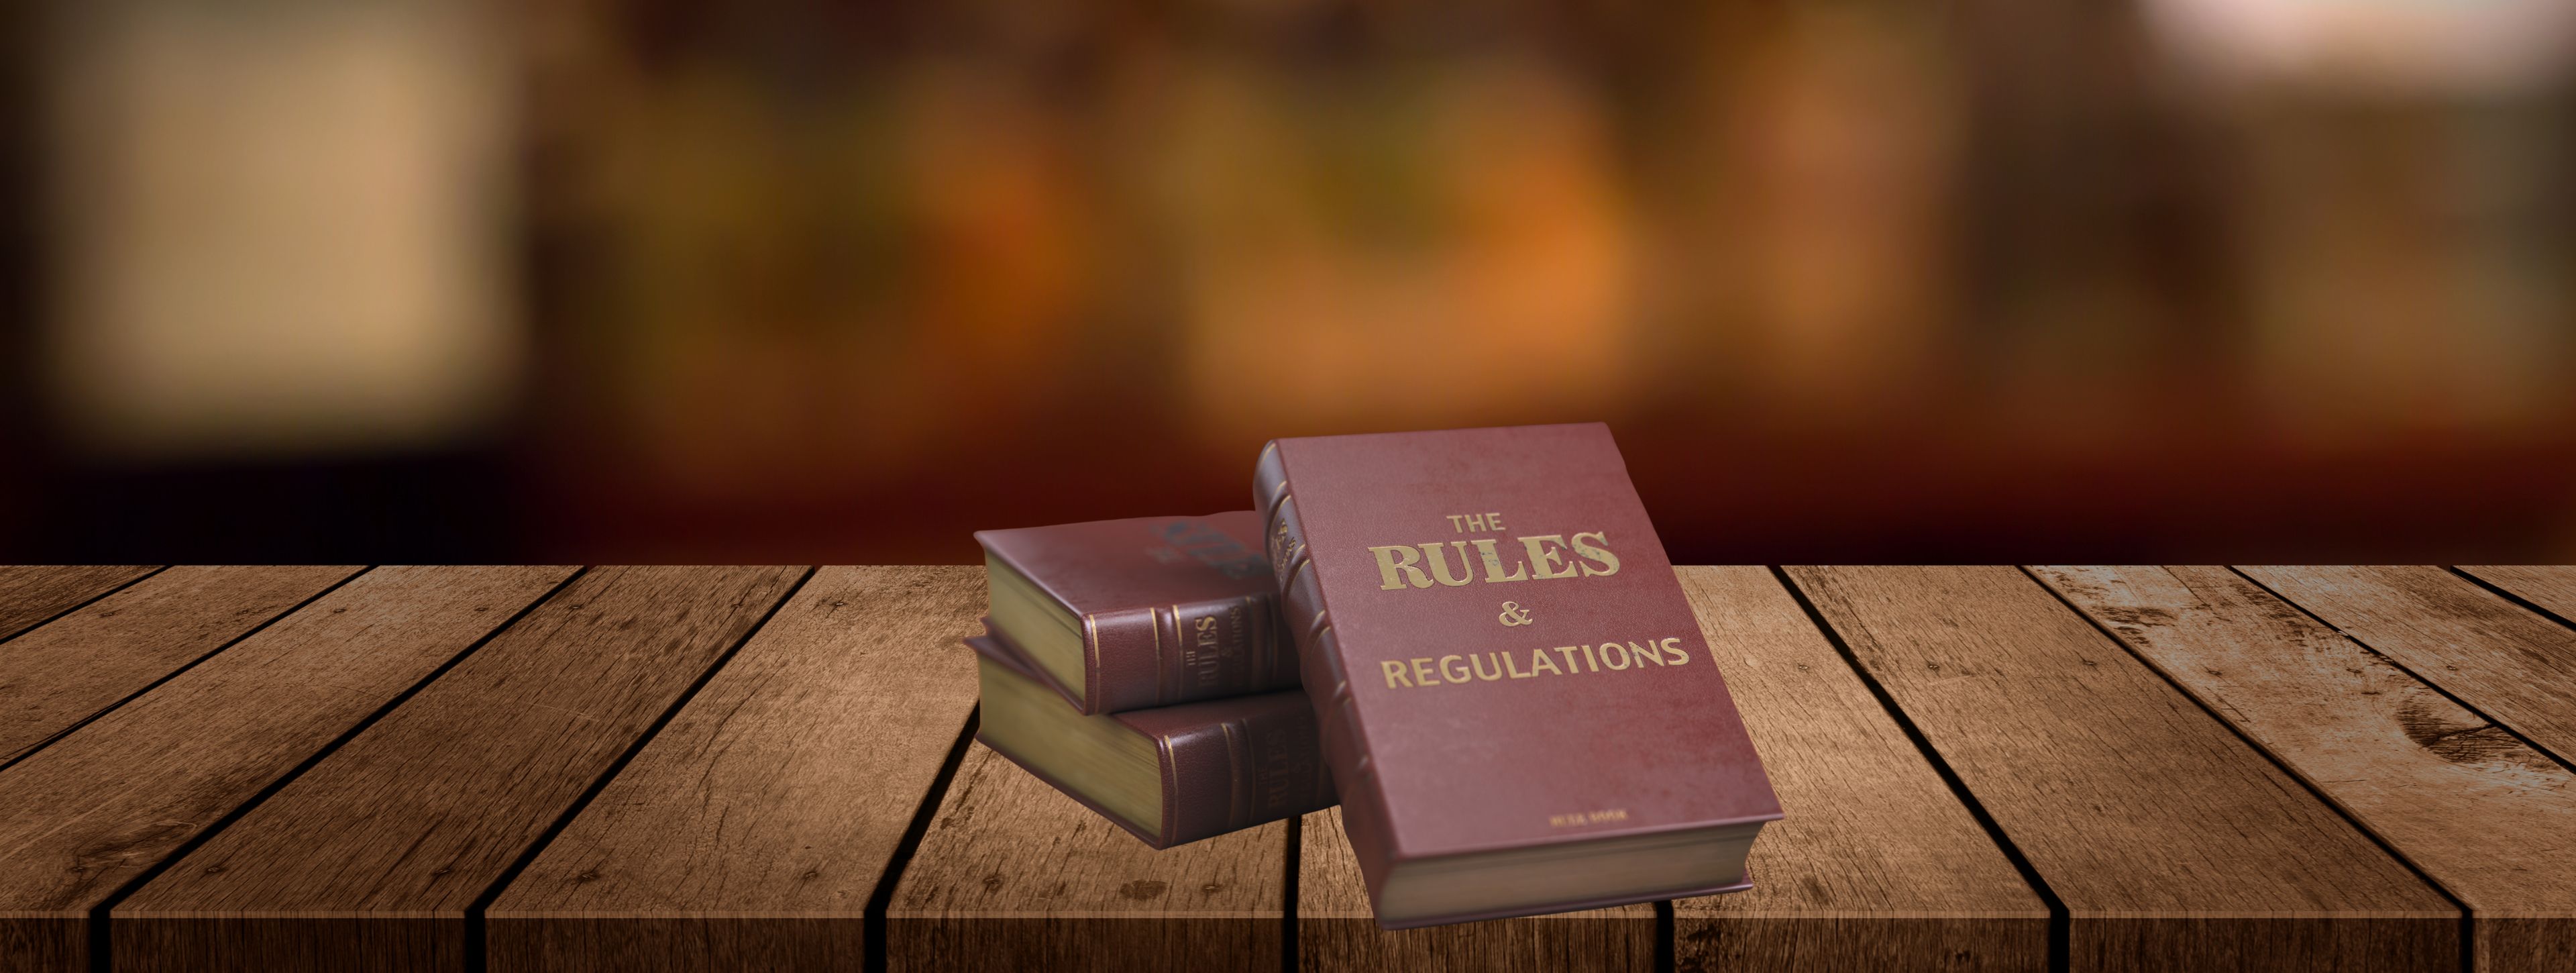 Rules and regulations